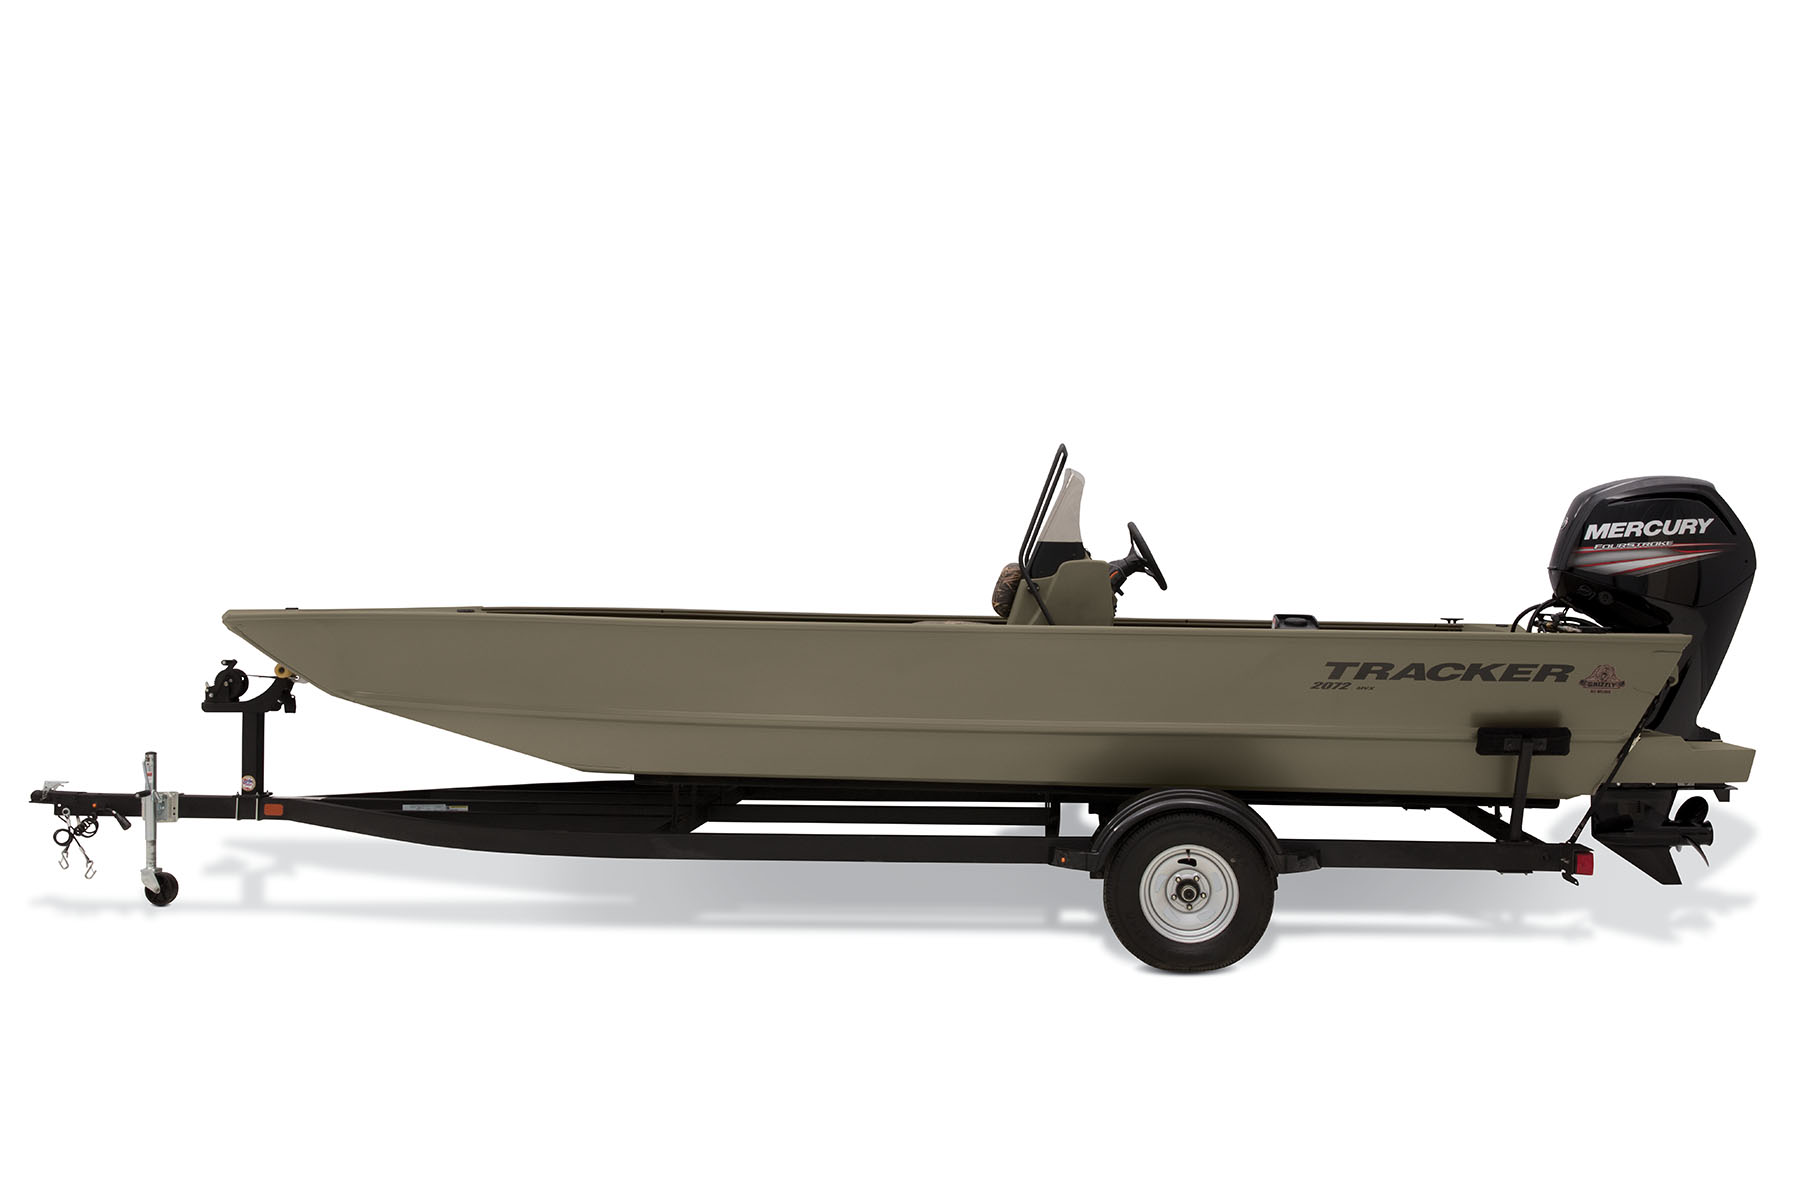 New 2023 Tracker Grizzly 2072 CC Sportsman, 48821 Lansing - Boat